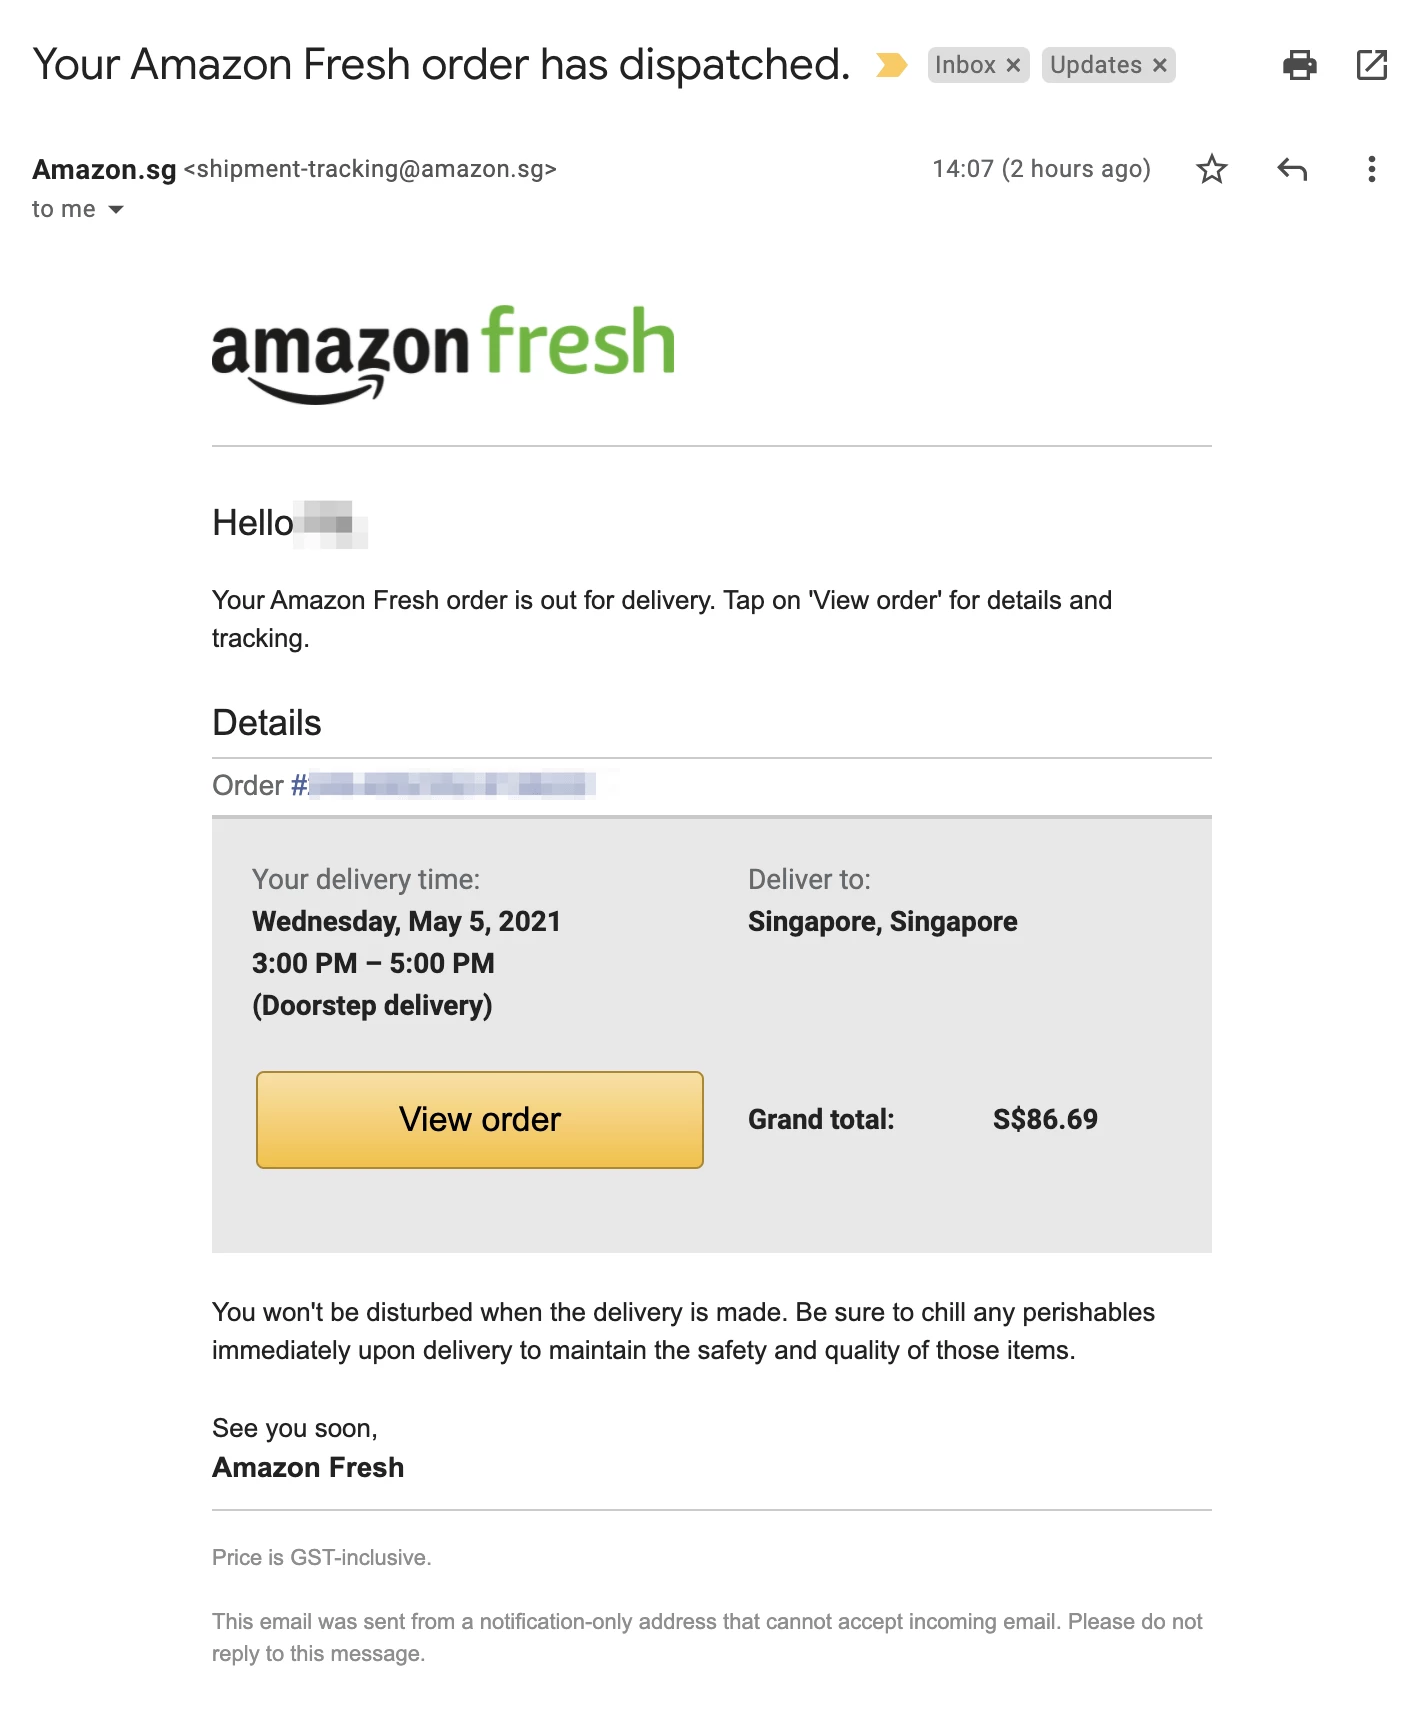 Amazon Fresh order confirmation email